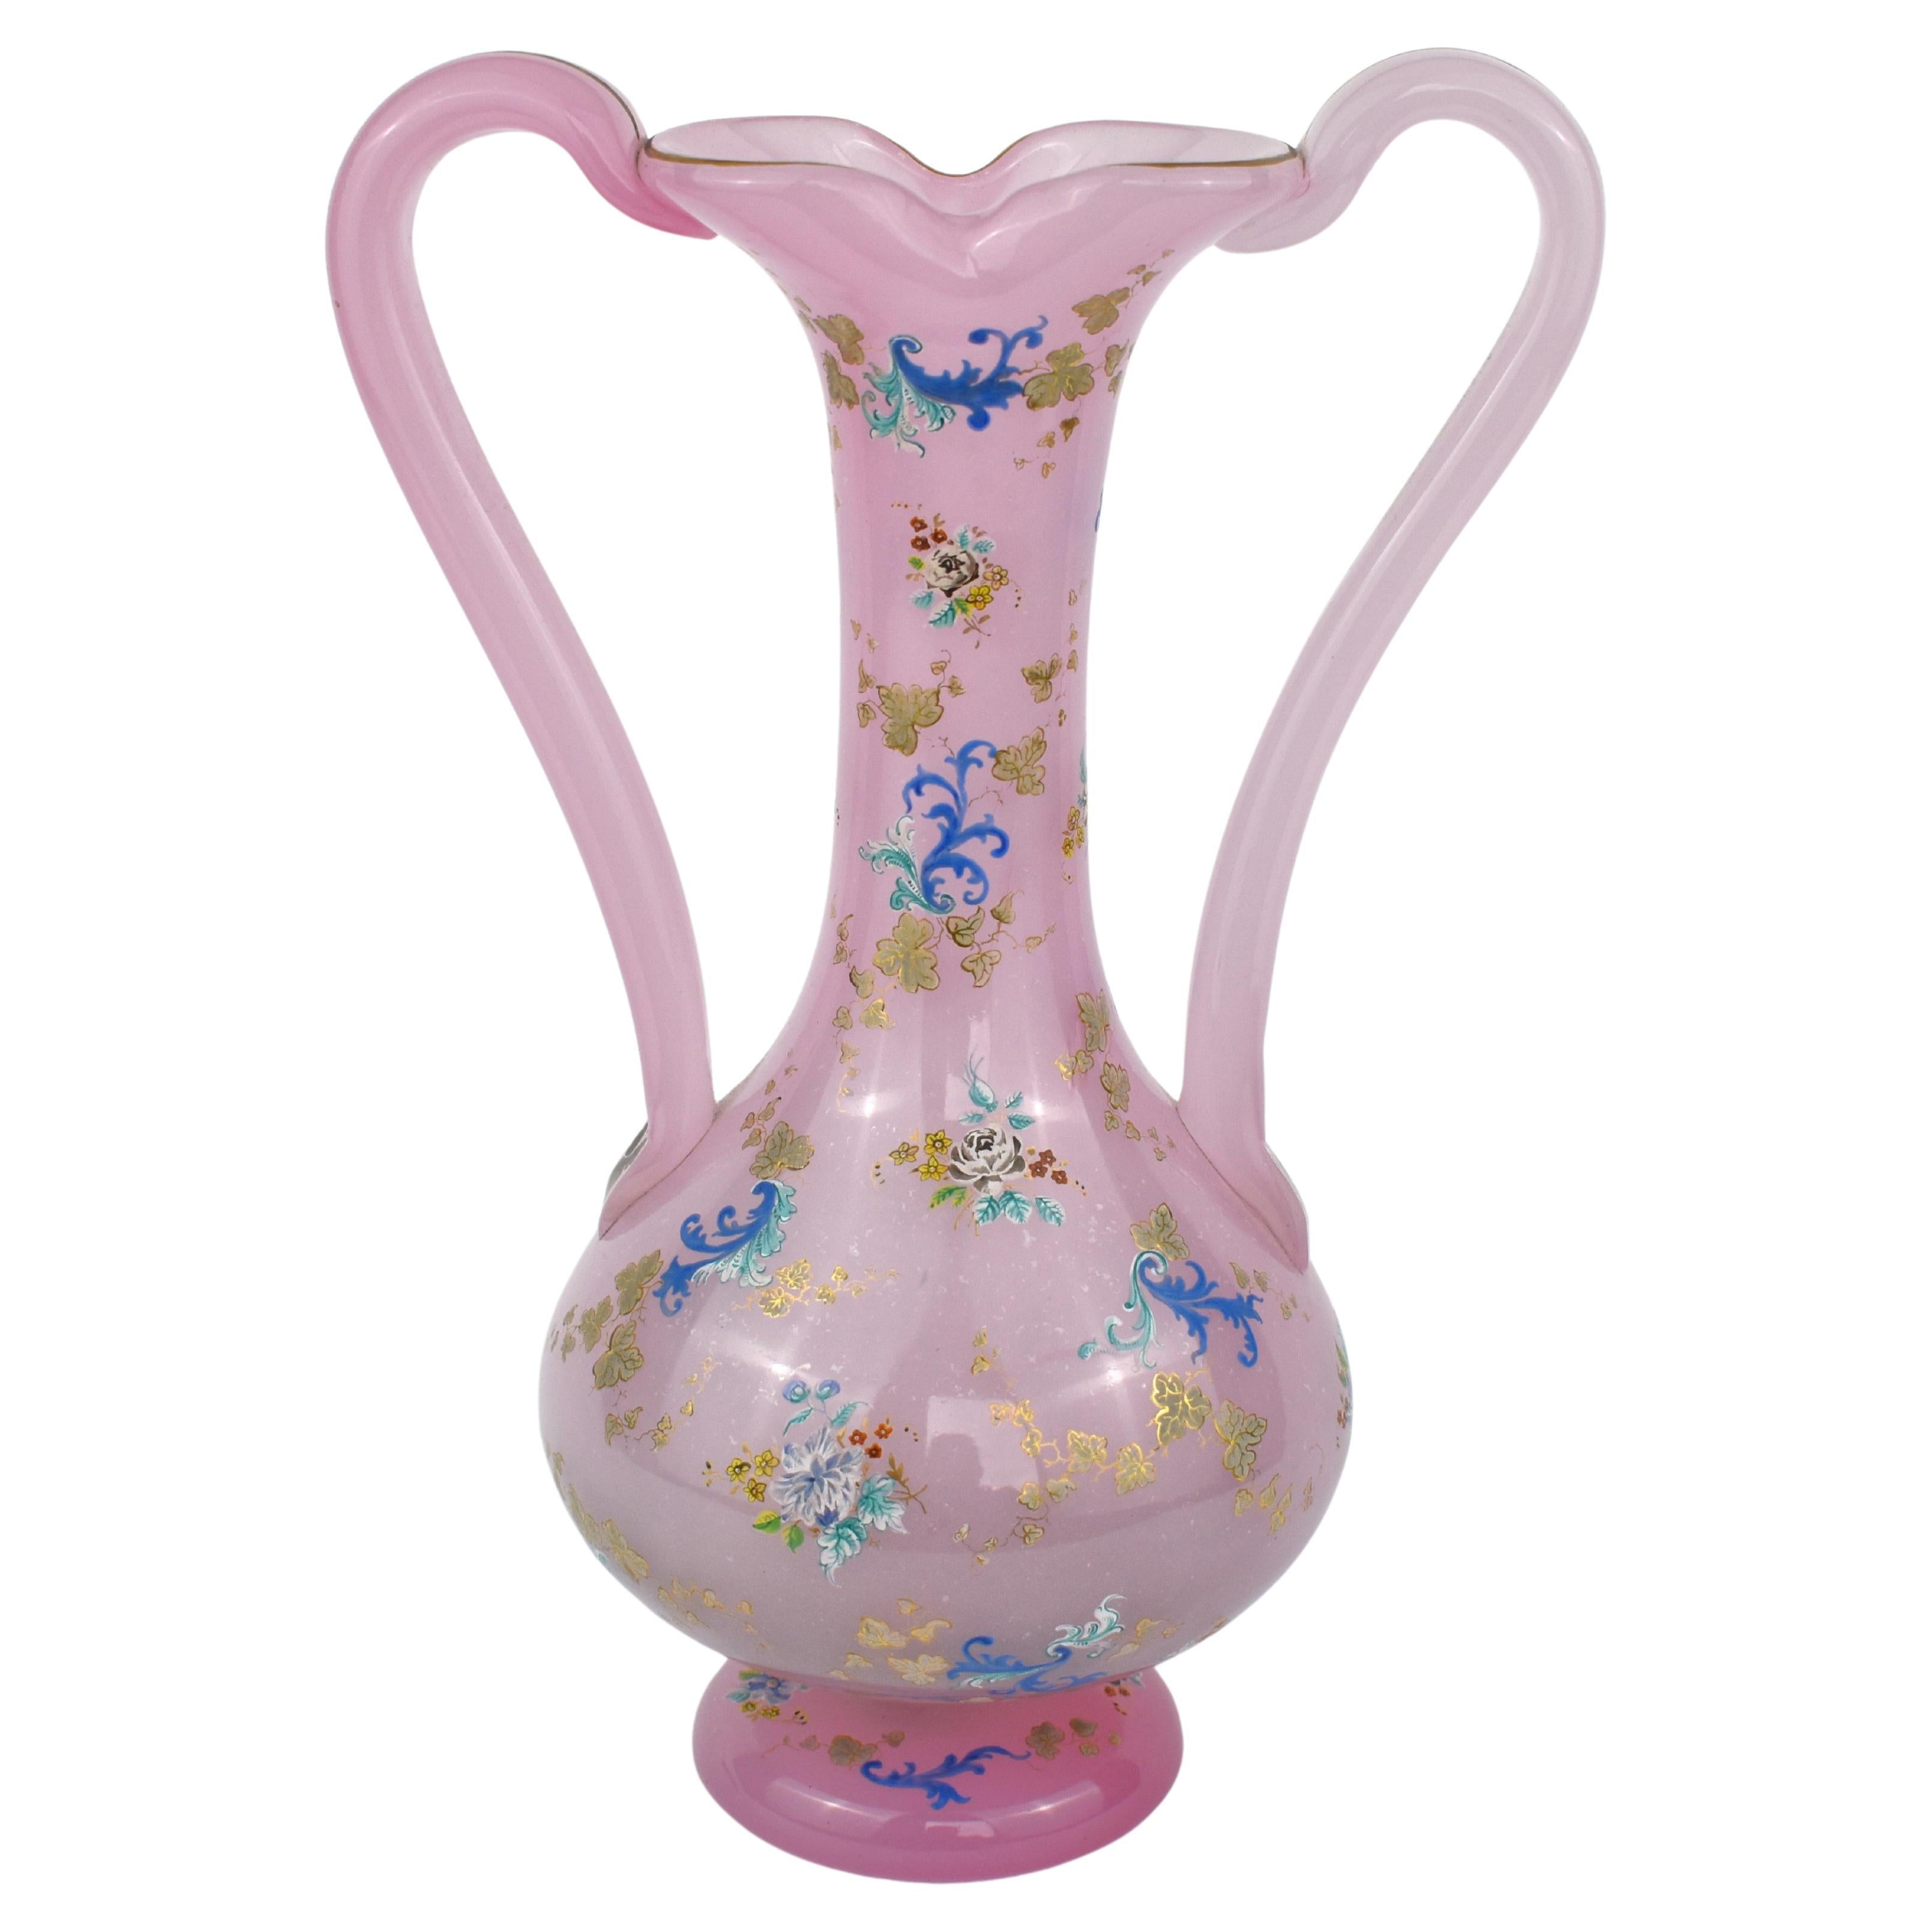 An exceptional vase with two handles made of pink opaline alabaster glass by Moser

painted all around with enamel decoration, the circular body is richly decorated with fine colourful enamel featuring flowers, vines and scrollwork

further enamel